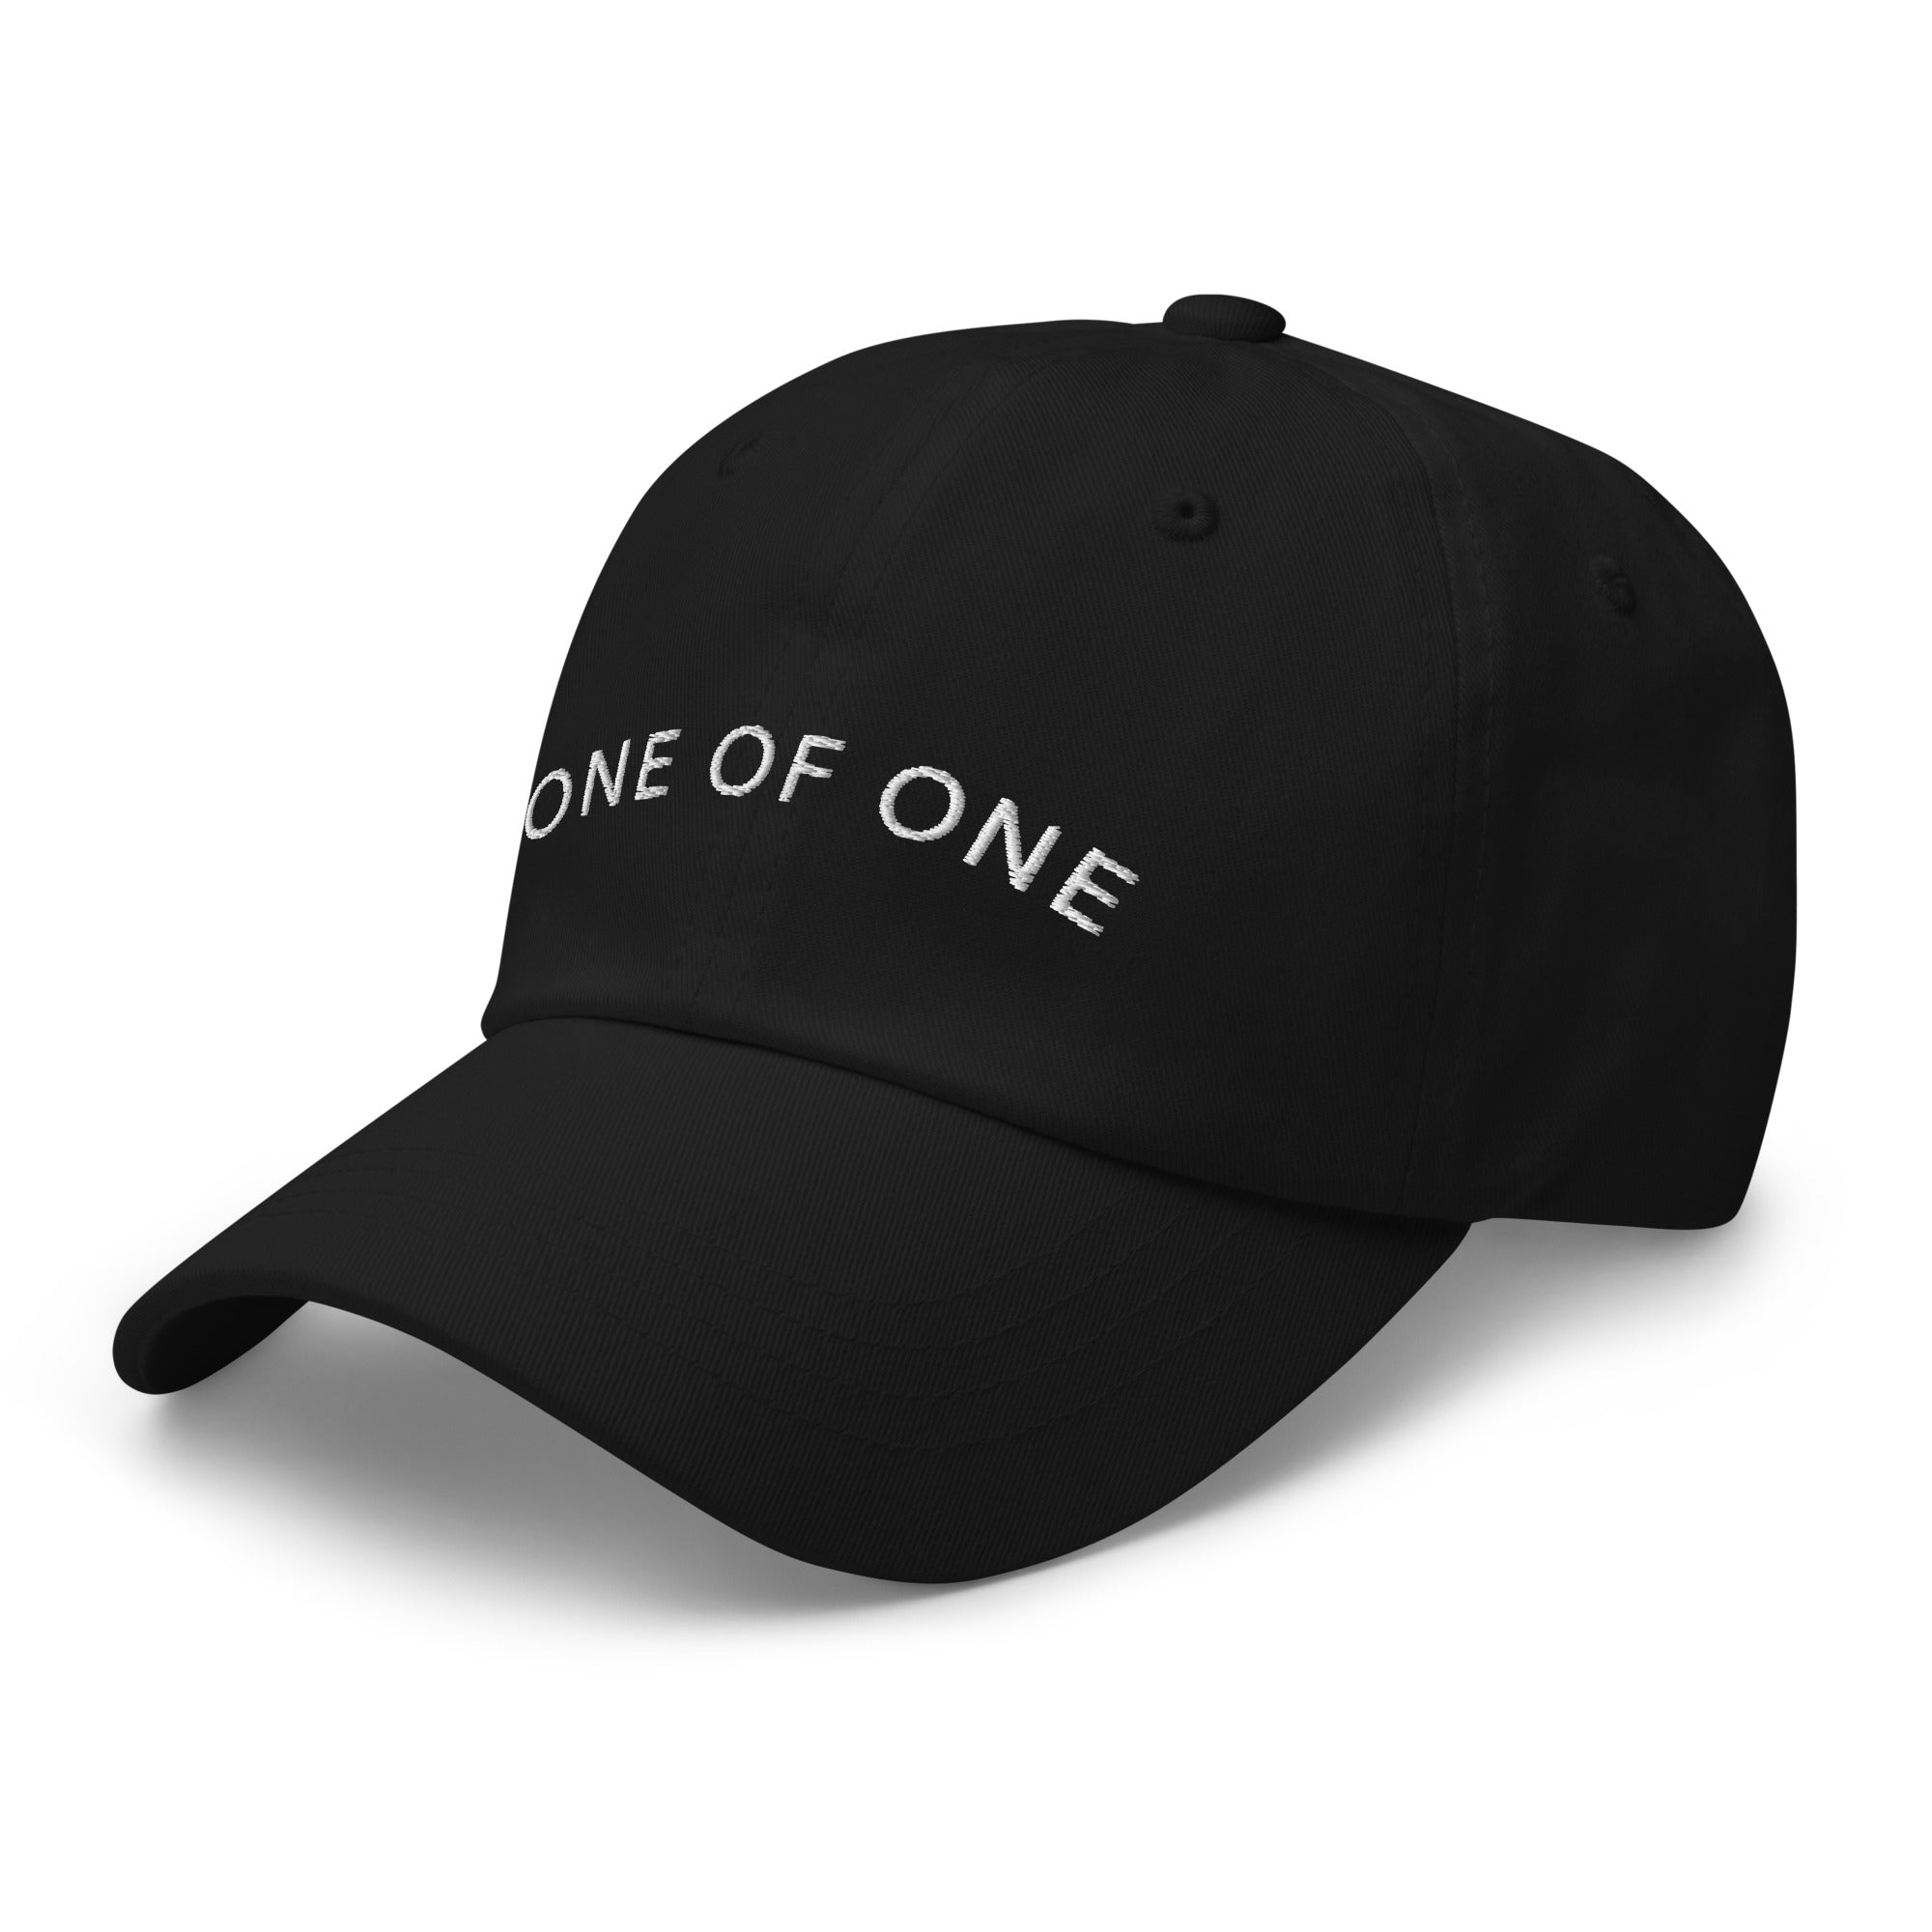 One of One Dad Hat (black)